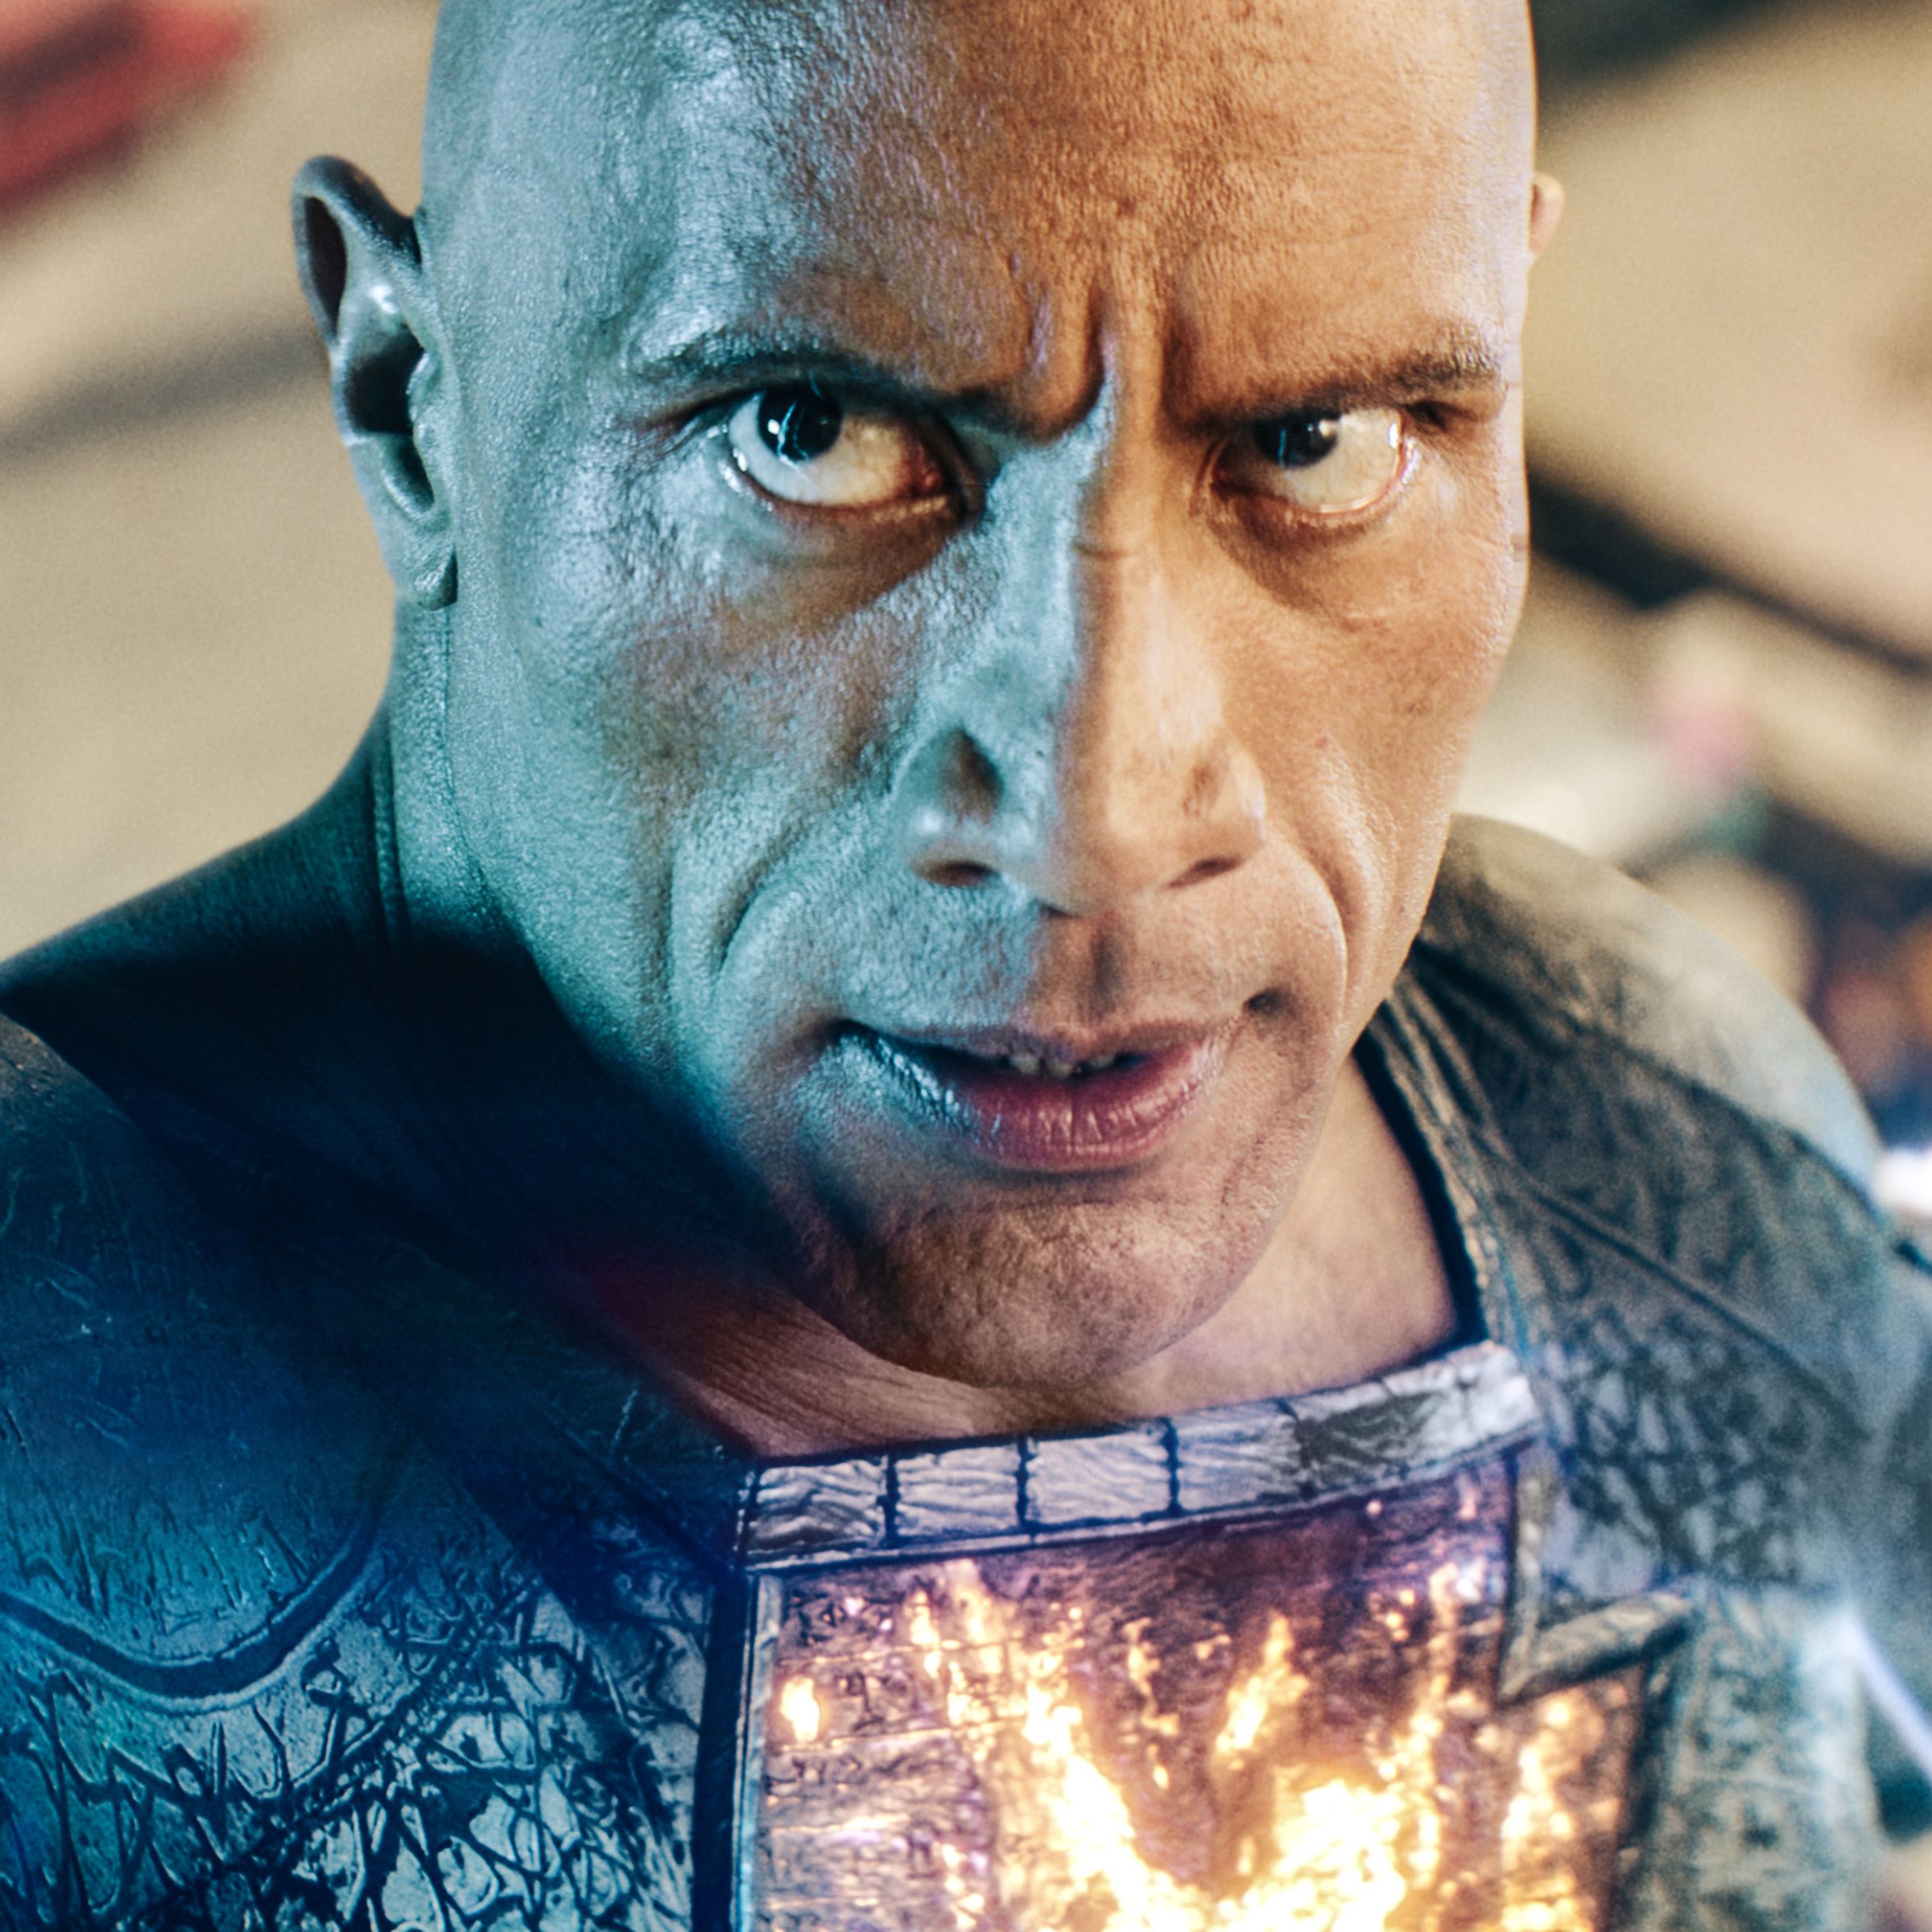 A tight shot of a bald man in a black superhero suit with lightning crawling up his left arm to shoot out of his right, which is reaching beyond the camera’s view.